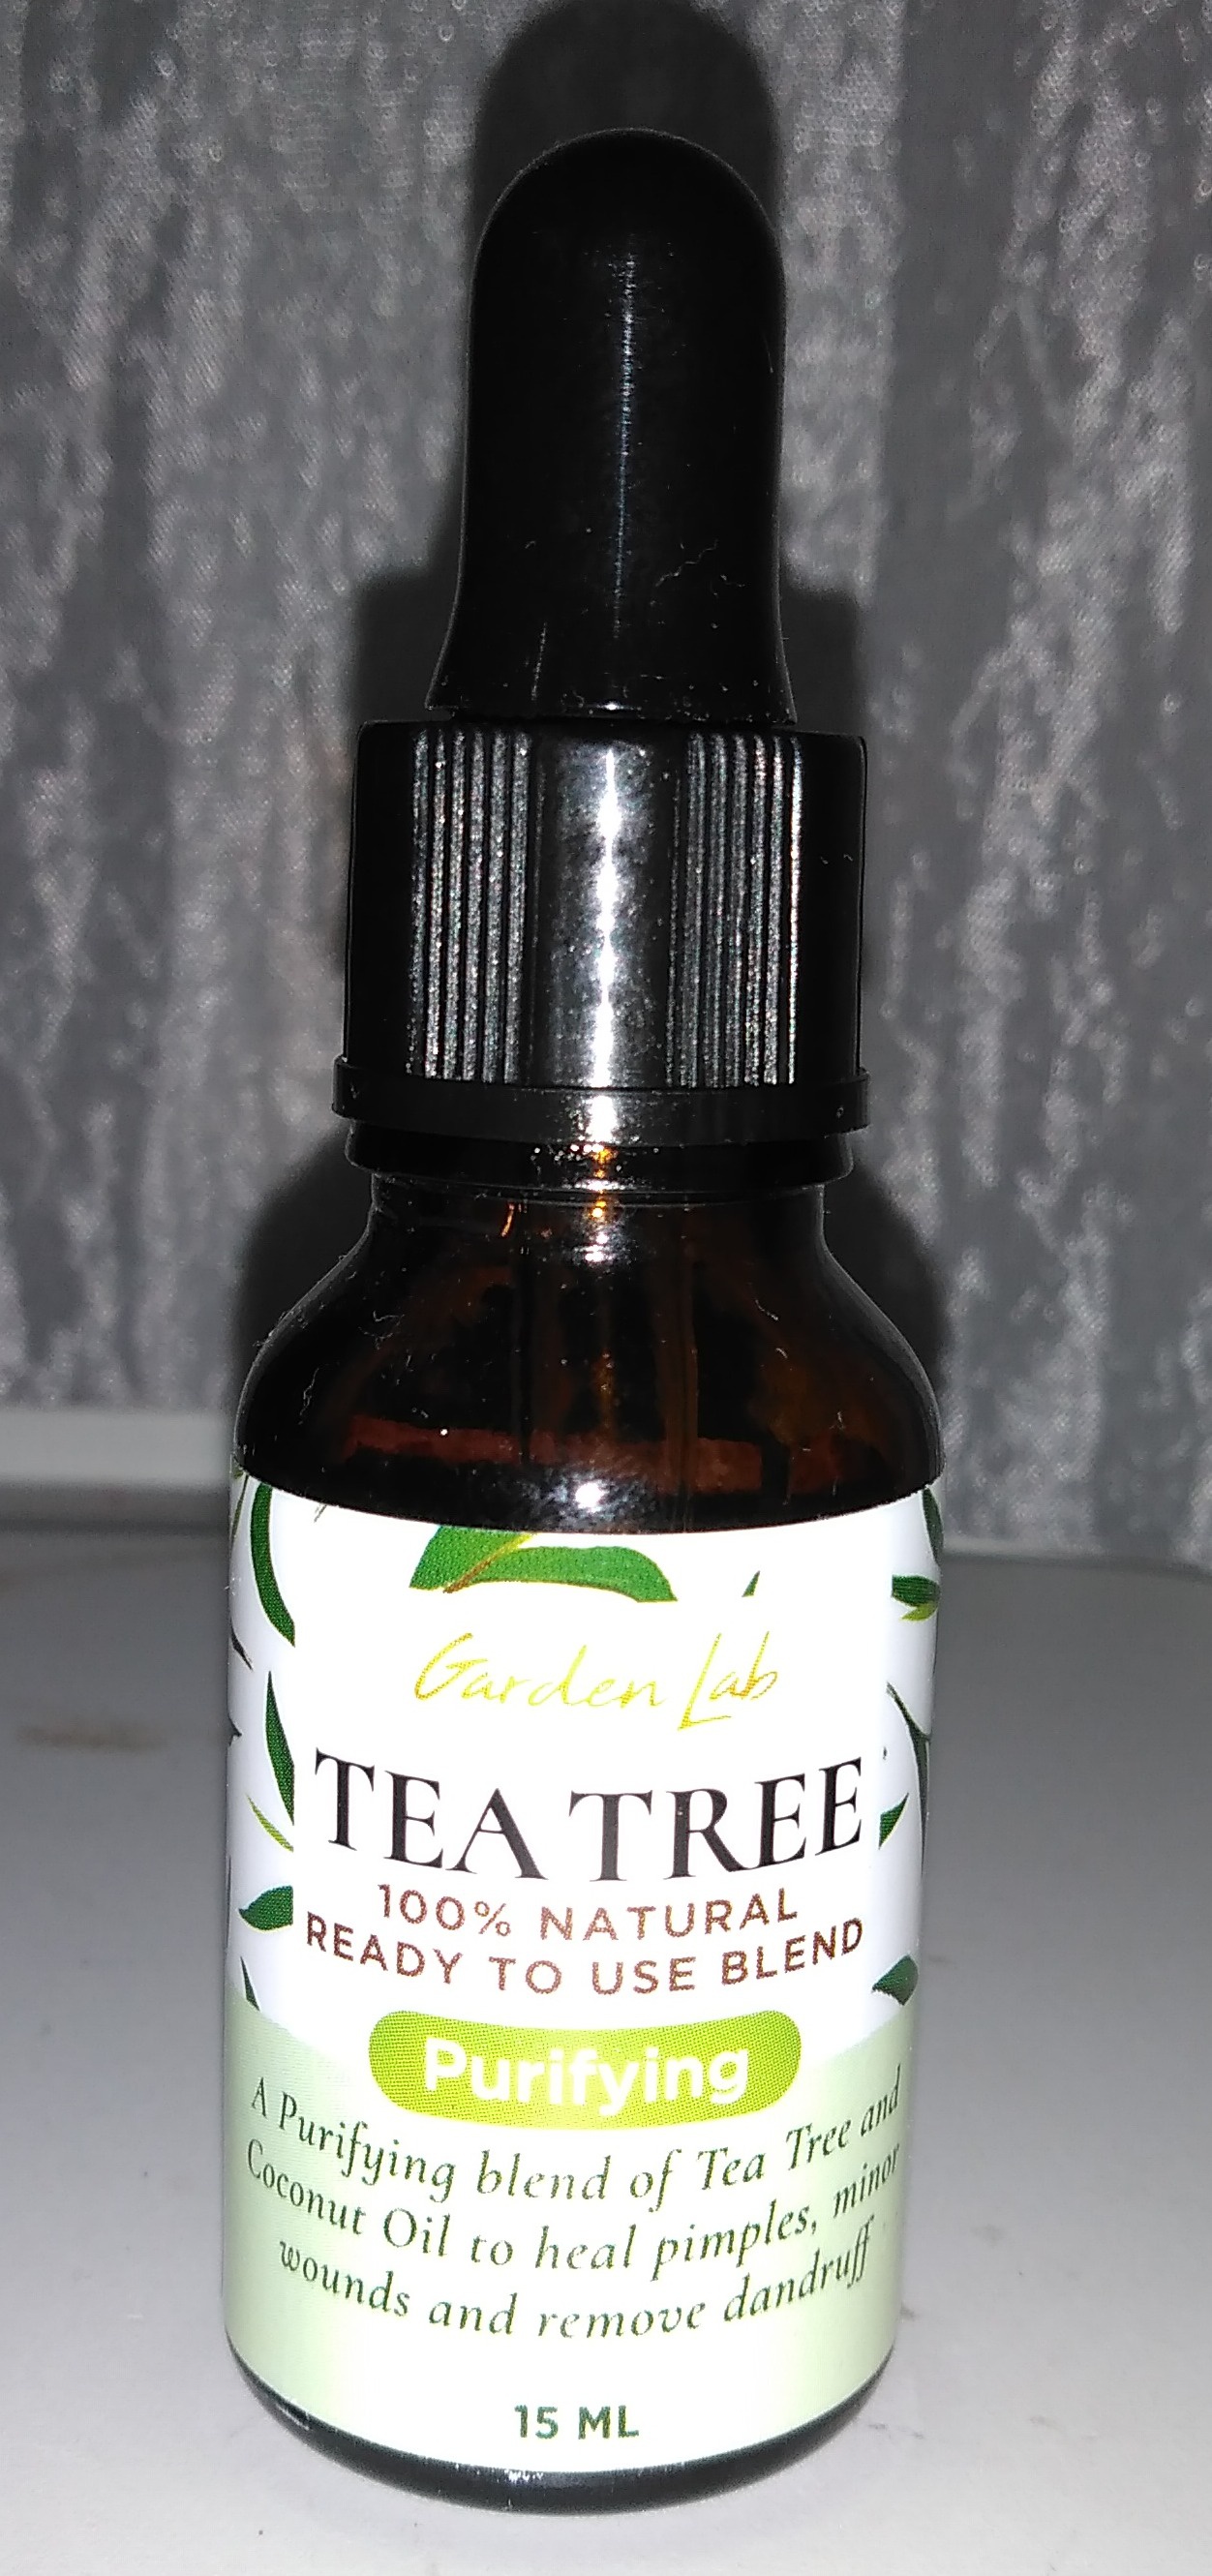 Garden Lab Tea Tree 100% Natural Ready To Use Blend